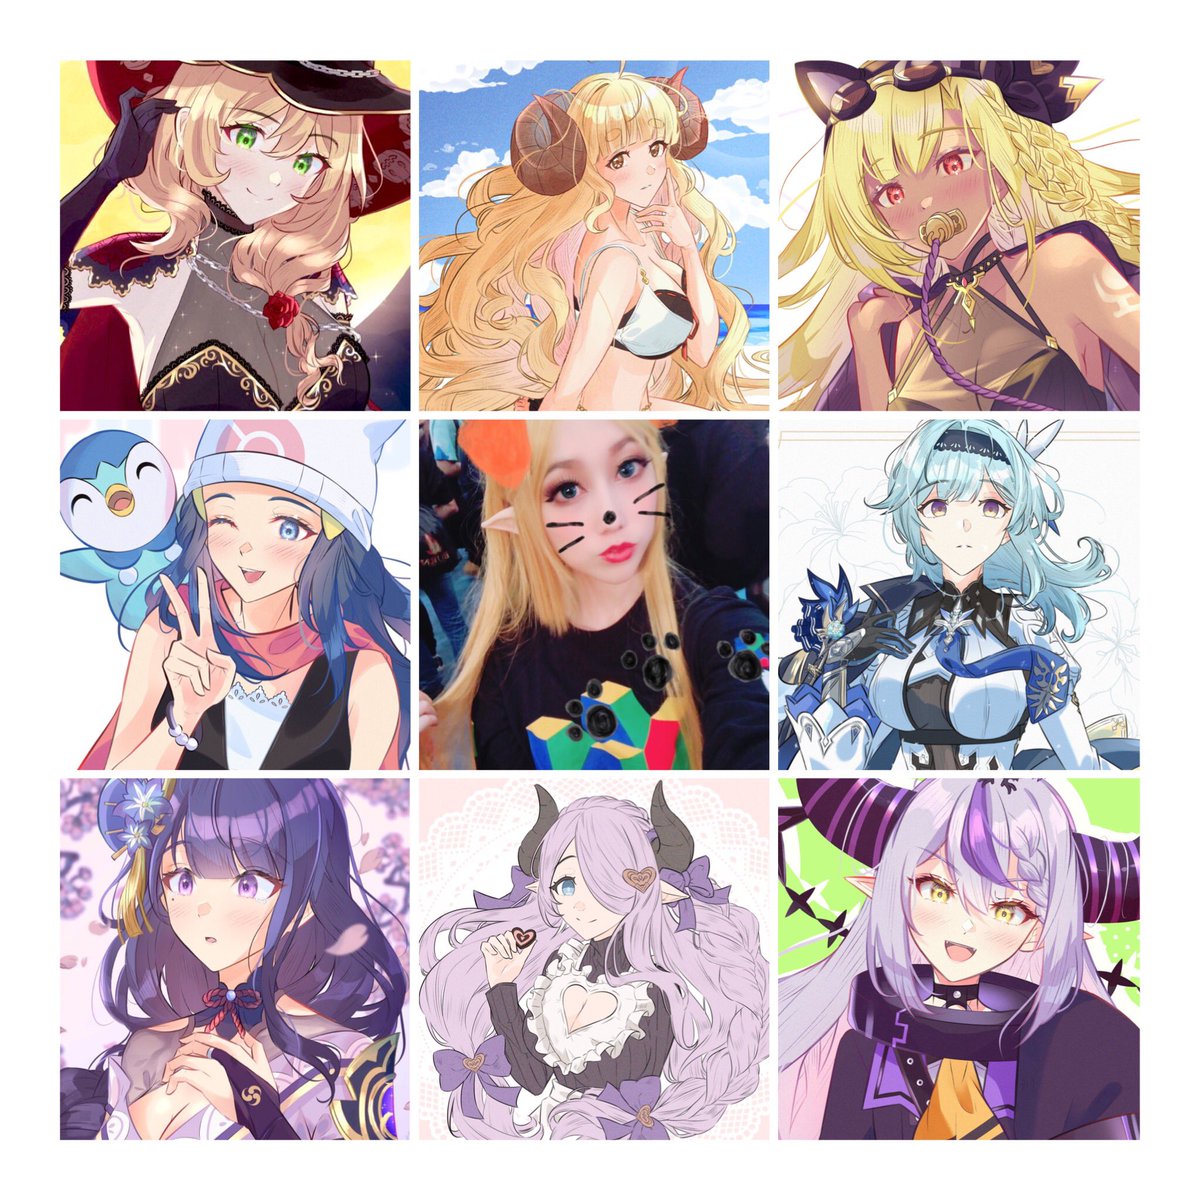 waa i've drawn more than ever this year (๑˃ᴗ˂)ﻭ 💞 #artvsartist2021 